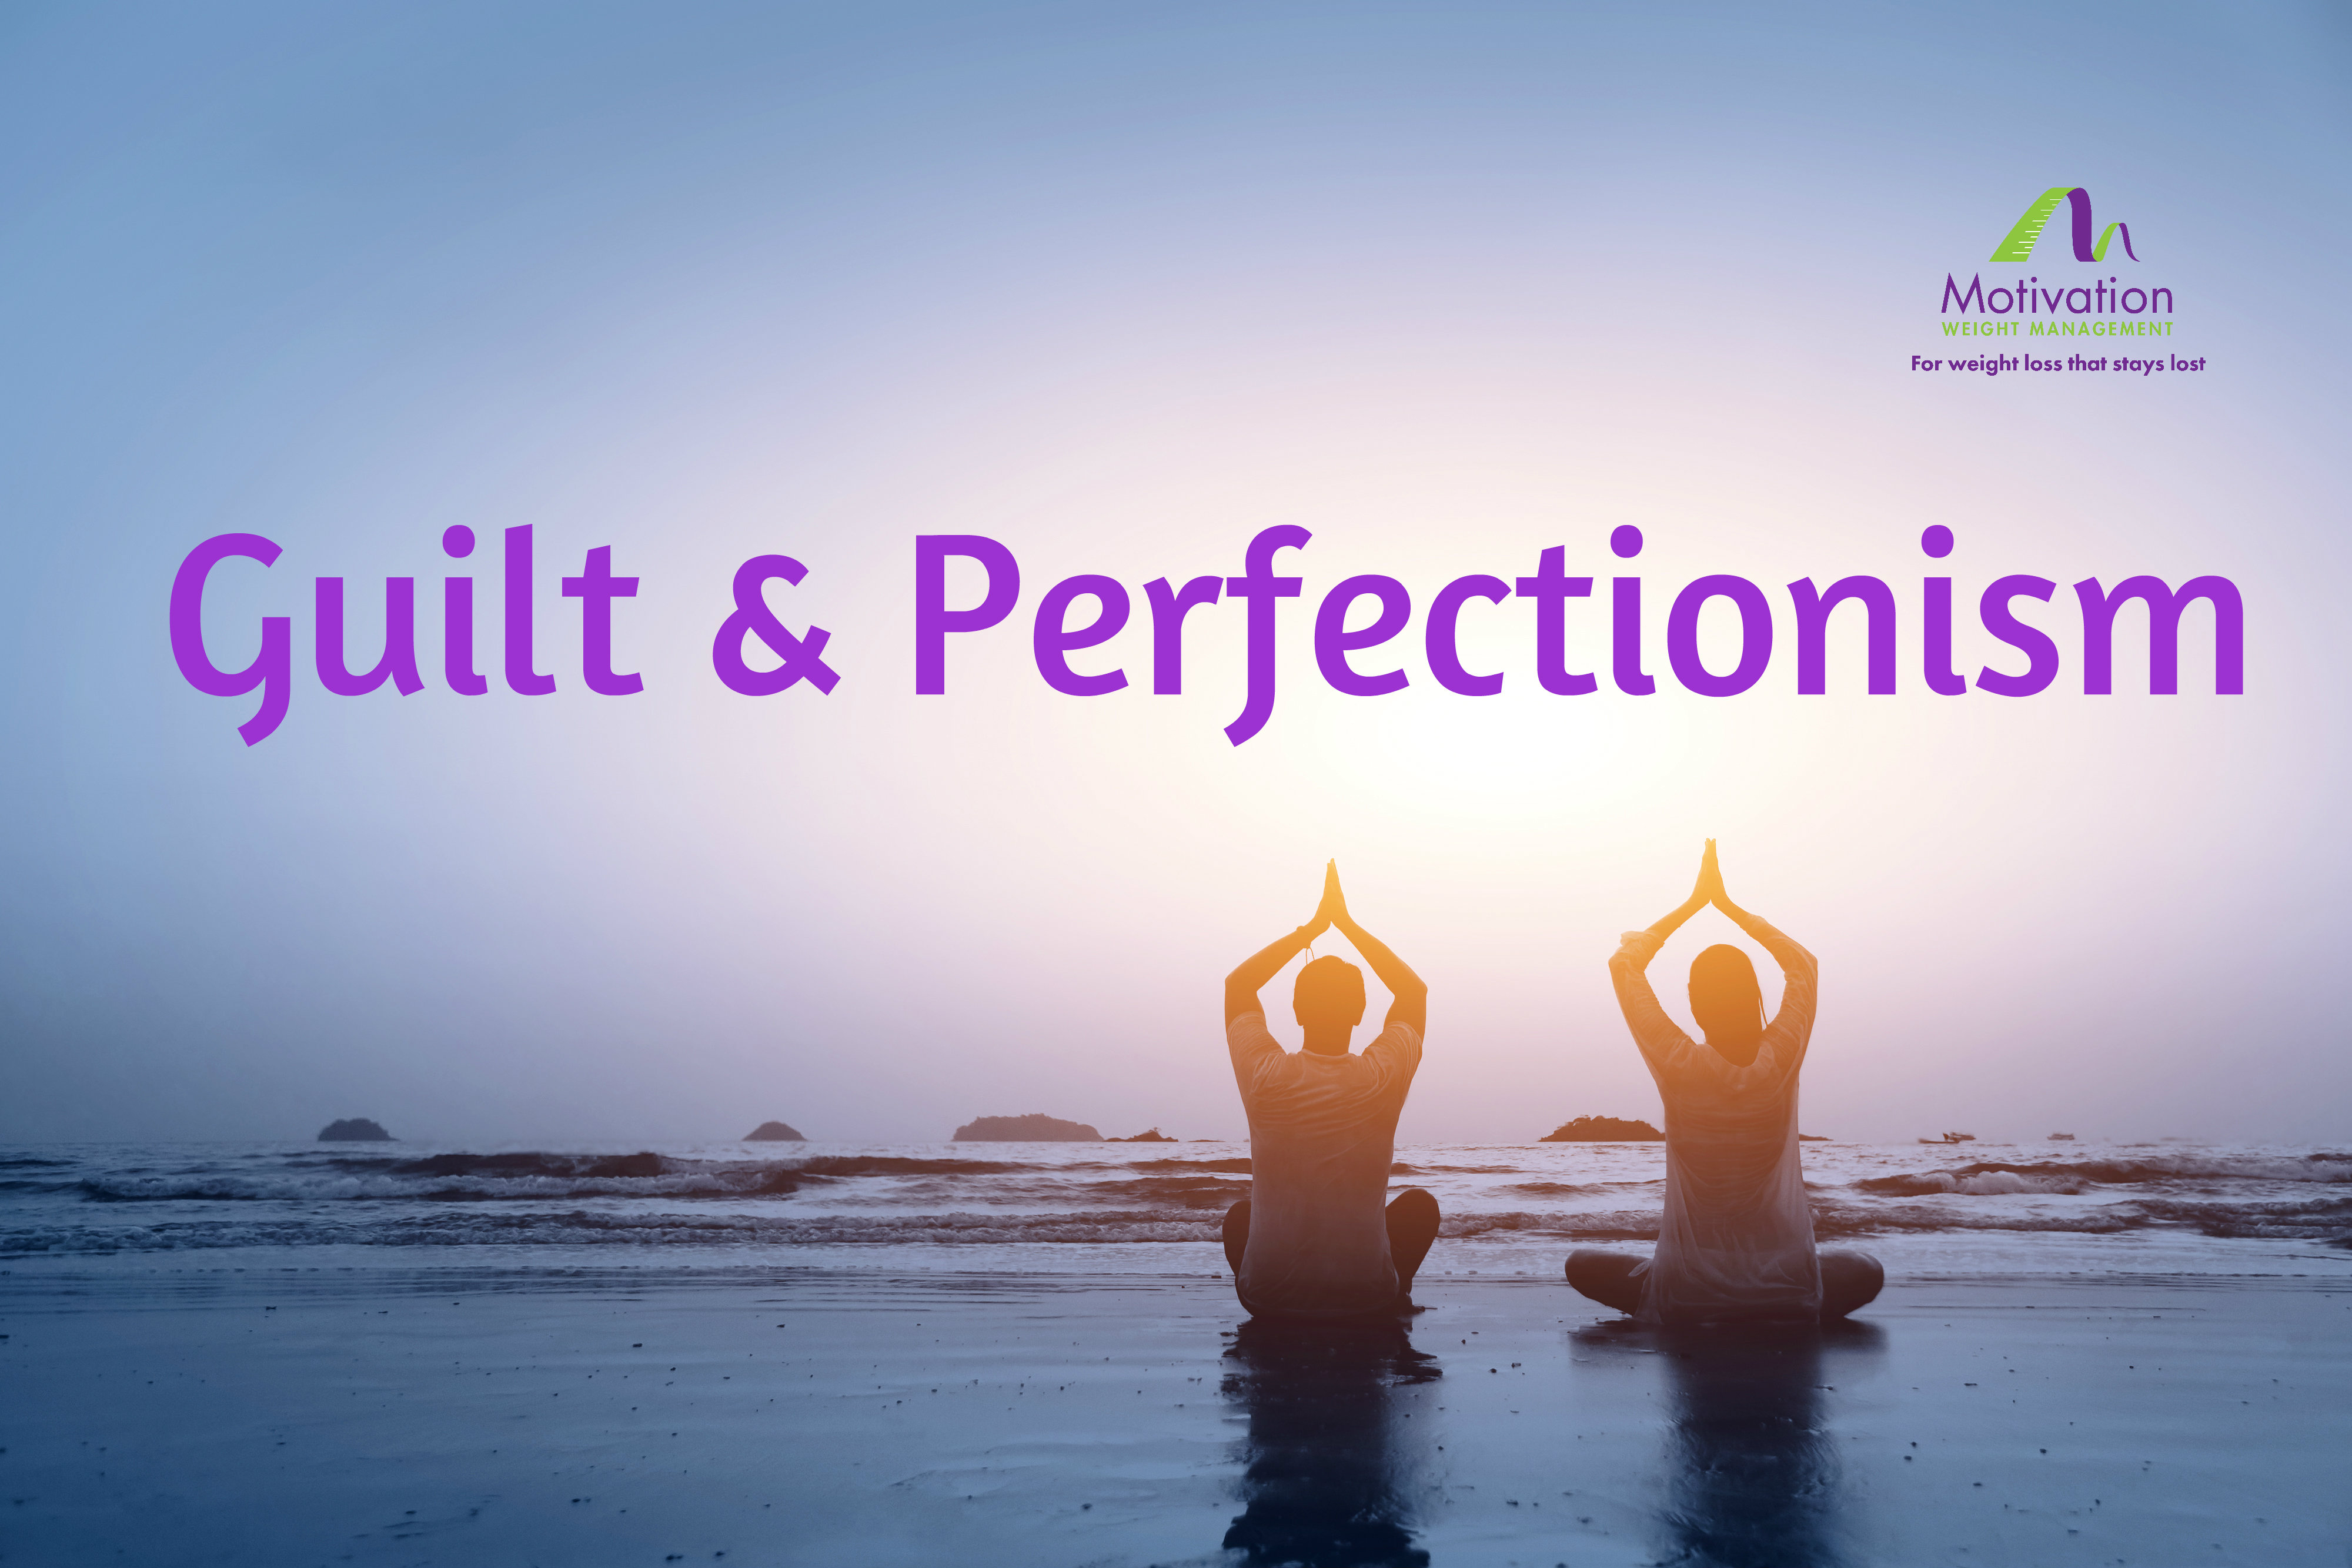 Day 9 Guilt & Perfectionism